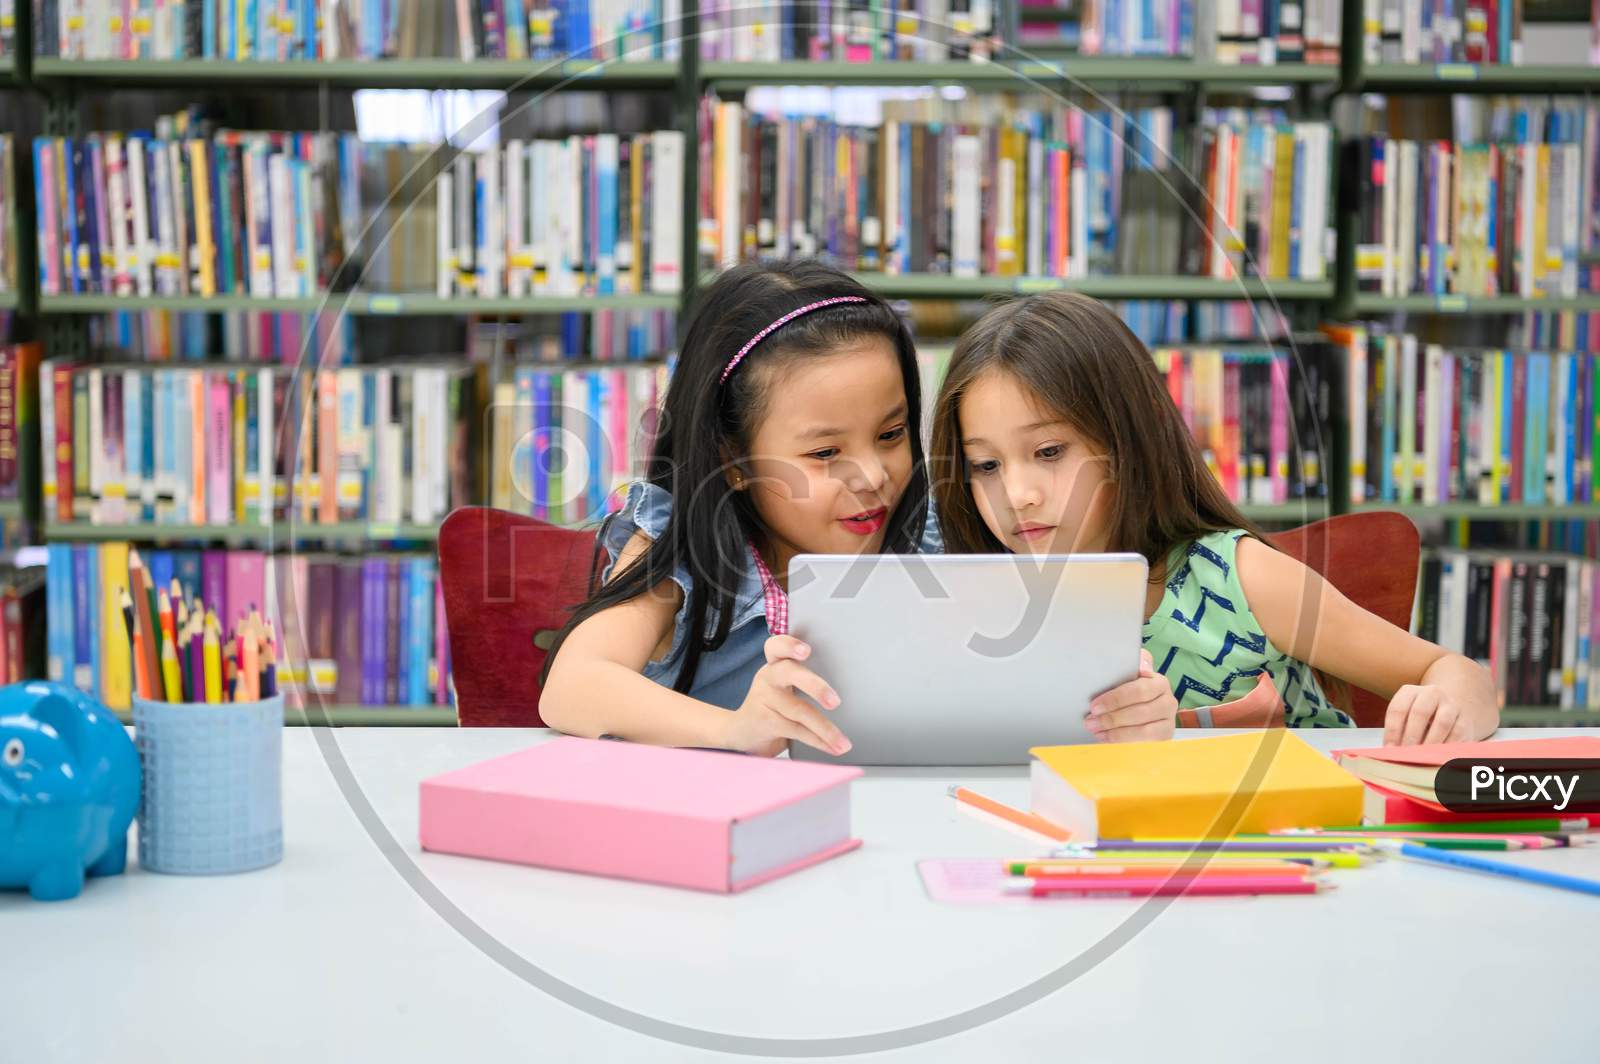 Two Little Happy Cute Girls Playing On A Tablet Pc Computing Device In Library At School. Education And Self Learning Wireless Technology Concept. People Lifestyles And Friendship. Preschool Children